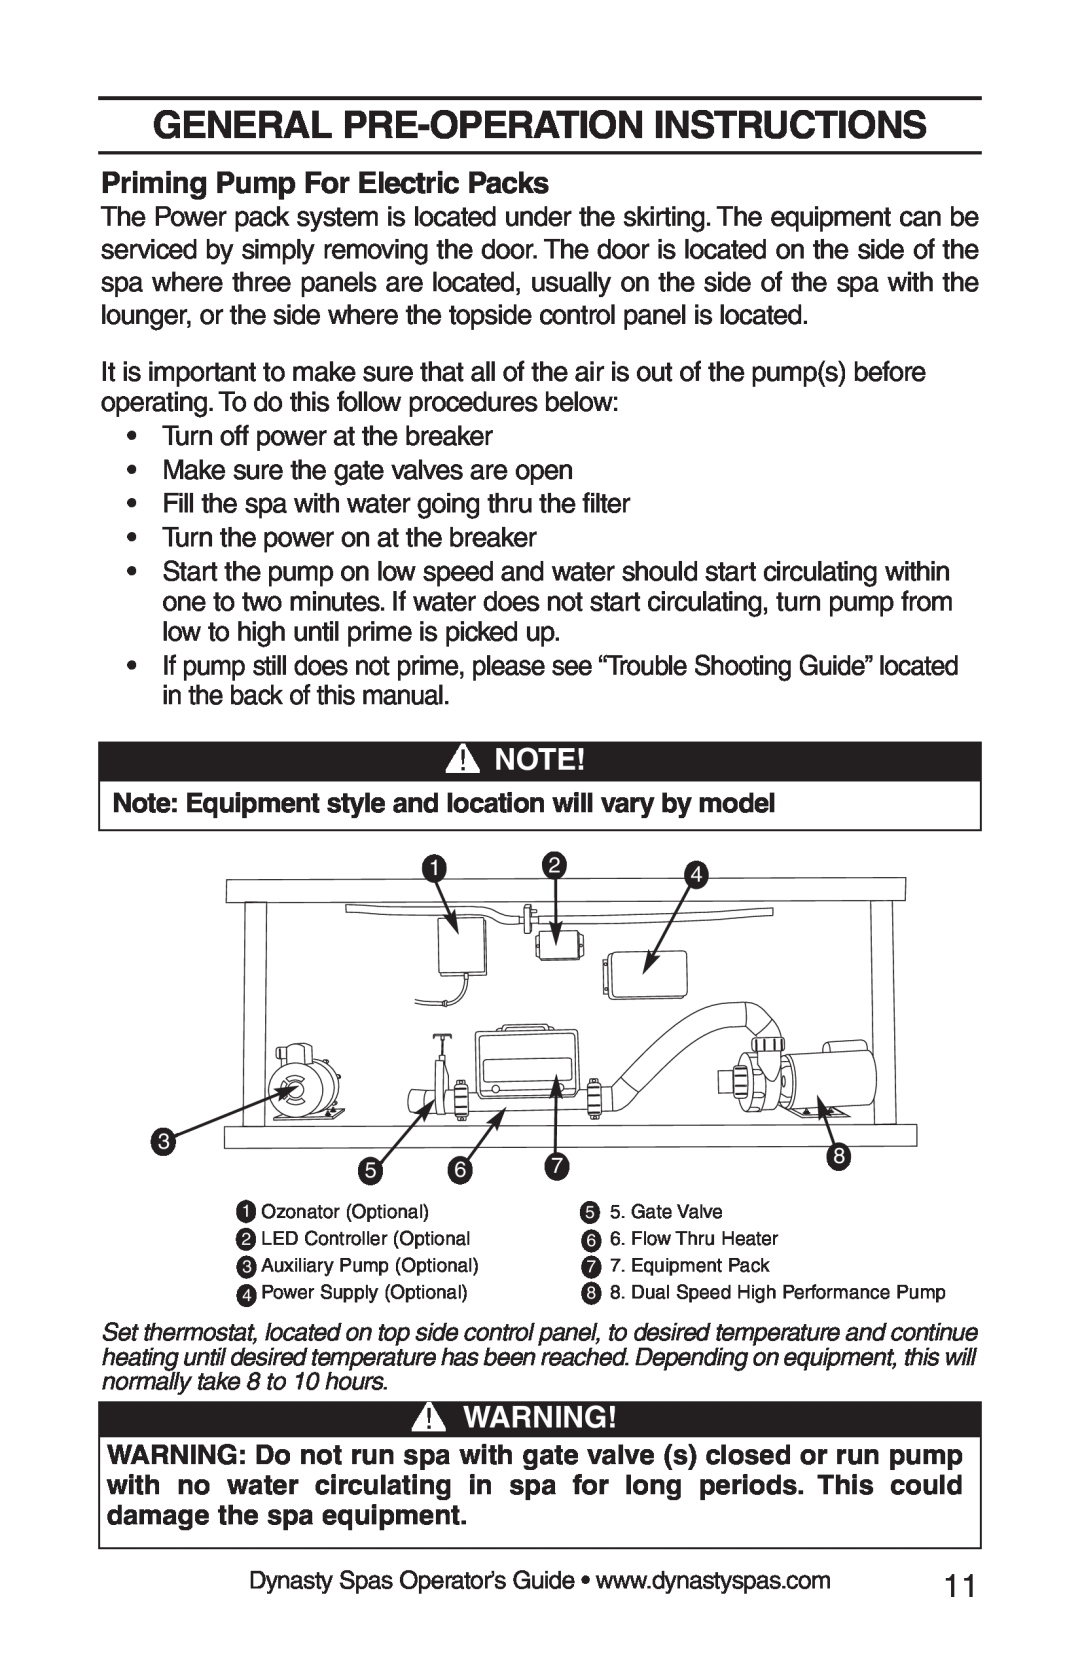 Dynasty Spas 2008 manual General Pre-Operation Instructions, Priming Pump For Electric Packs 